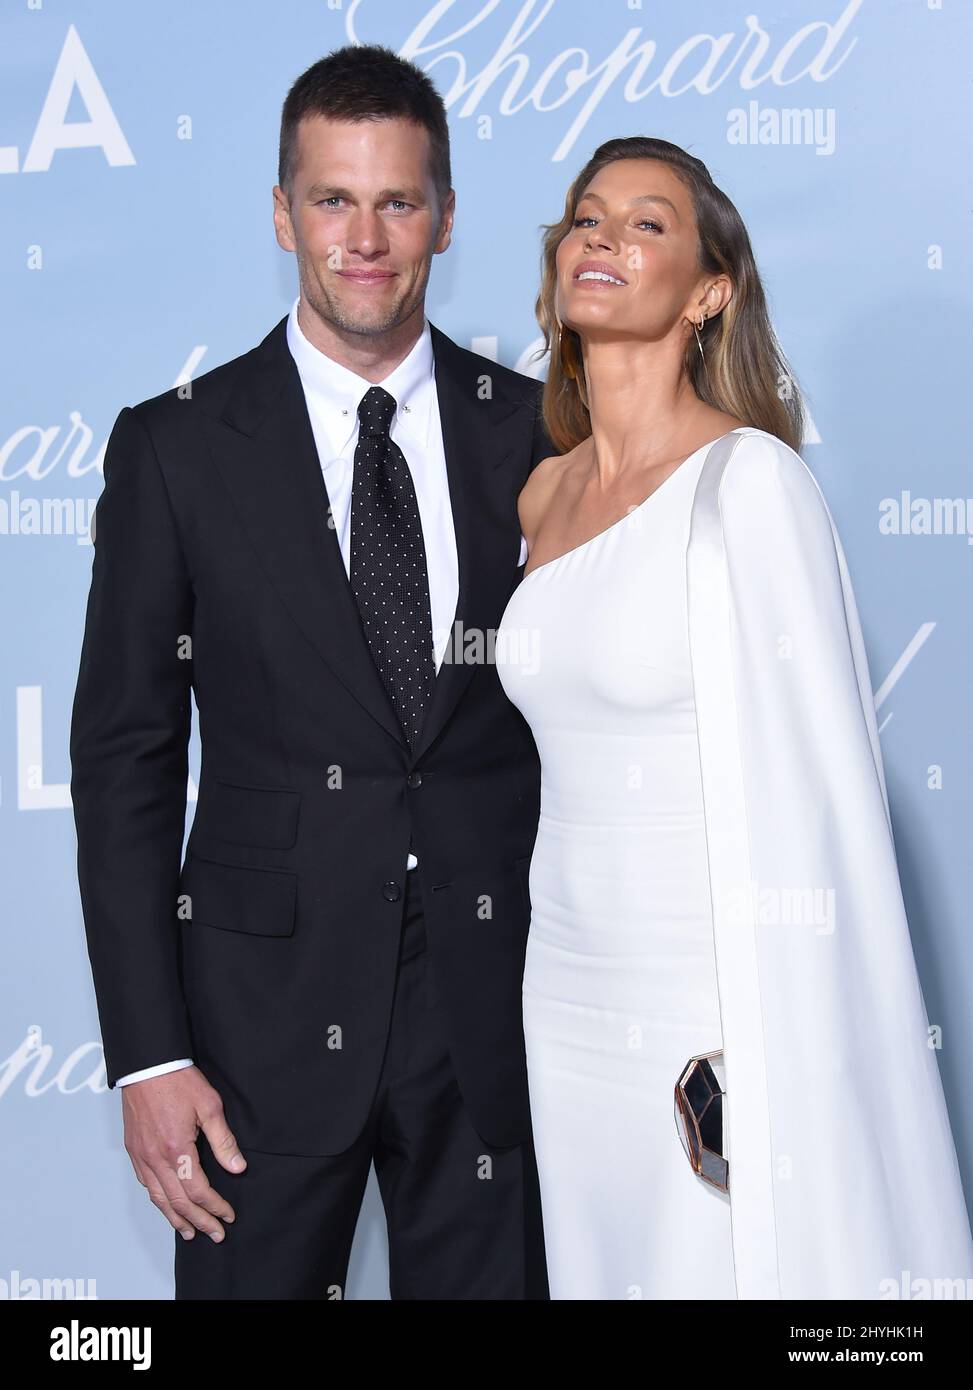 Tom Brady and Gisele Bundchen attending the Hollywood For Science gala in Los Angeles, California Stock Photo